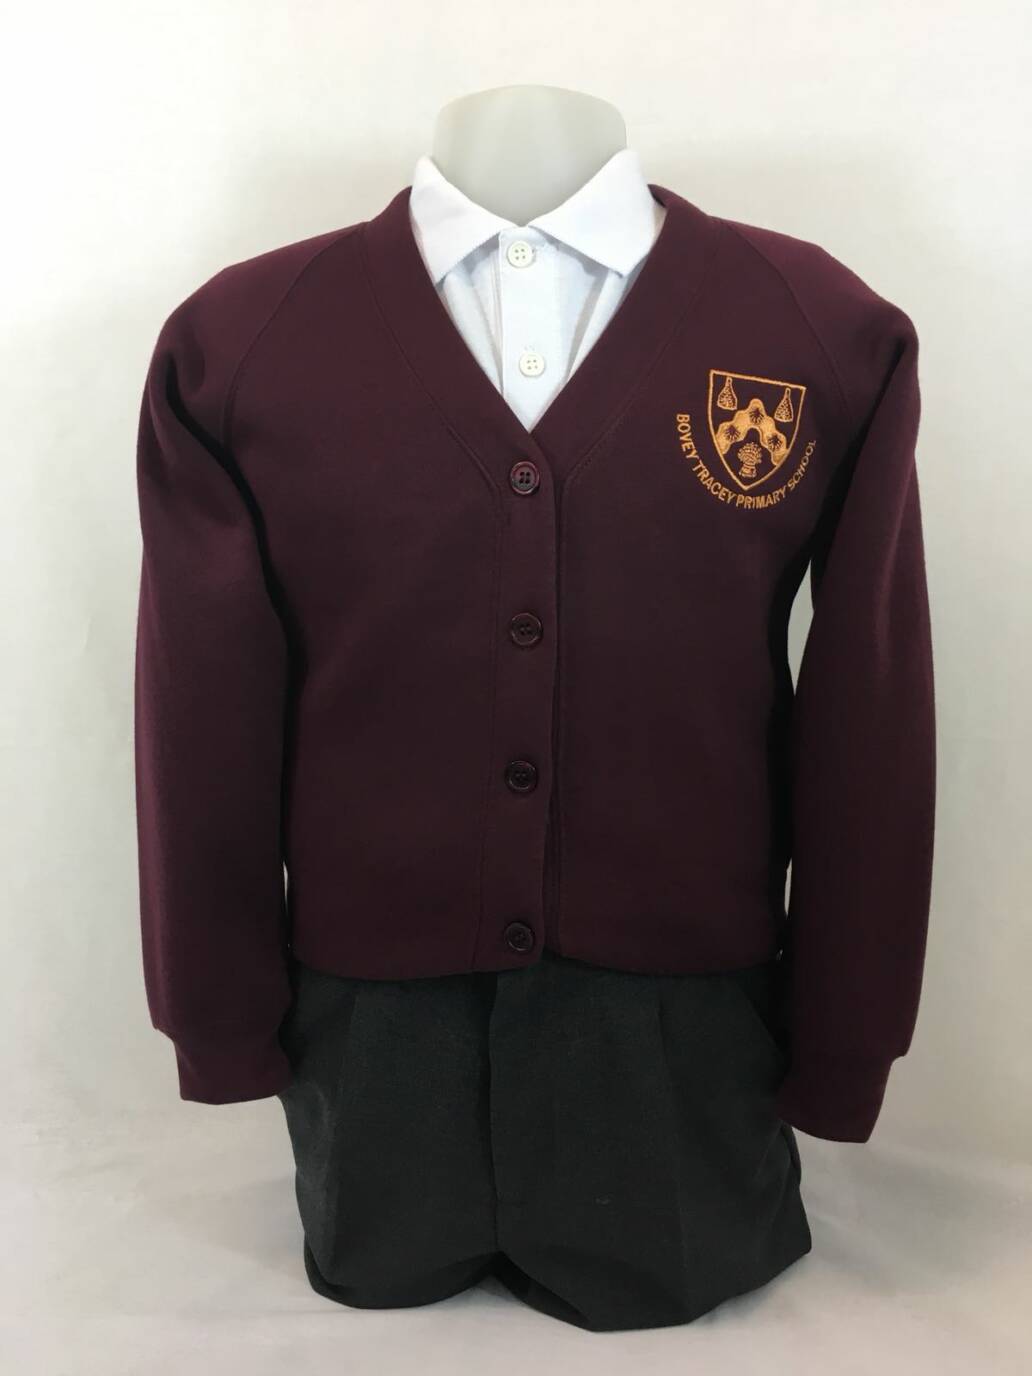 Bovey Tracey Primary School Cardigan